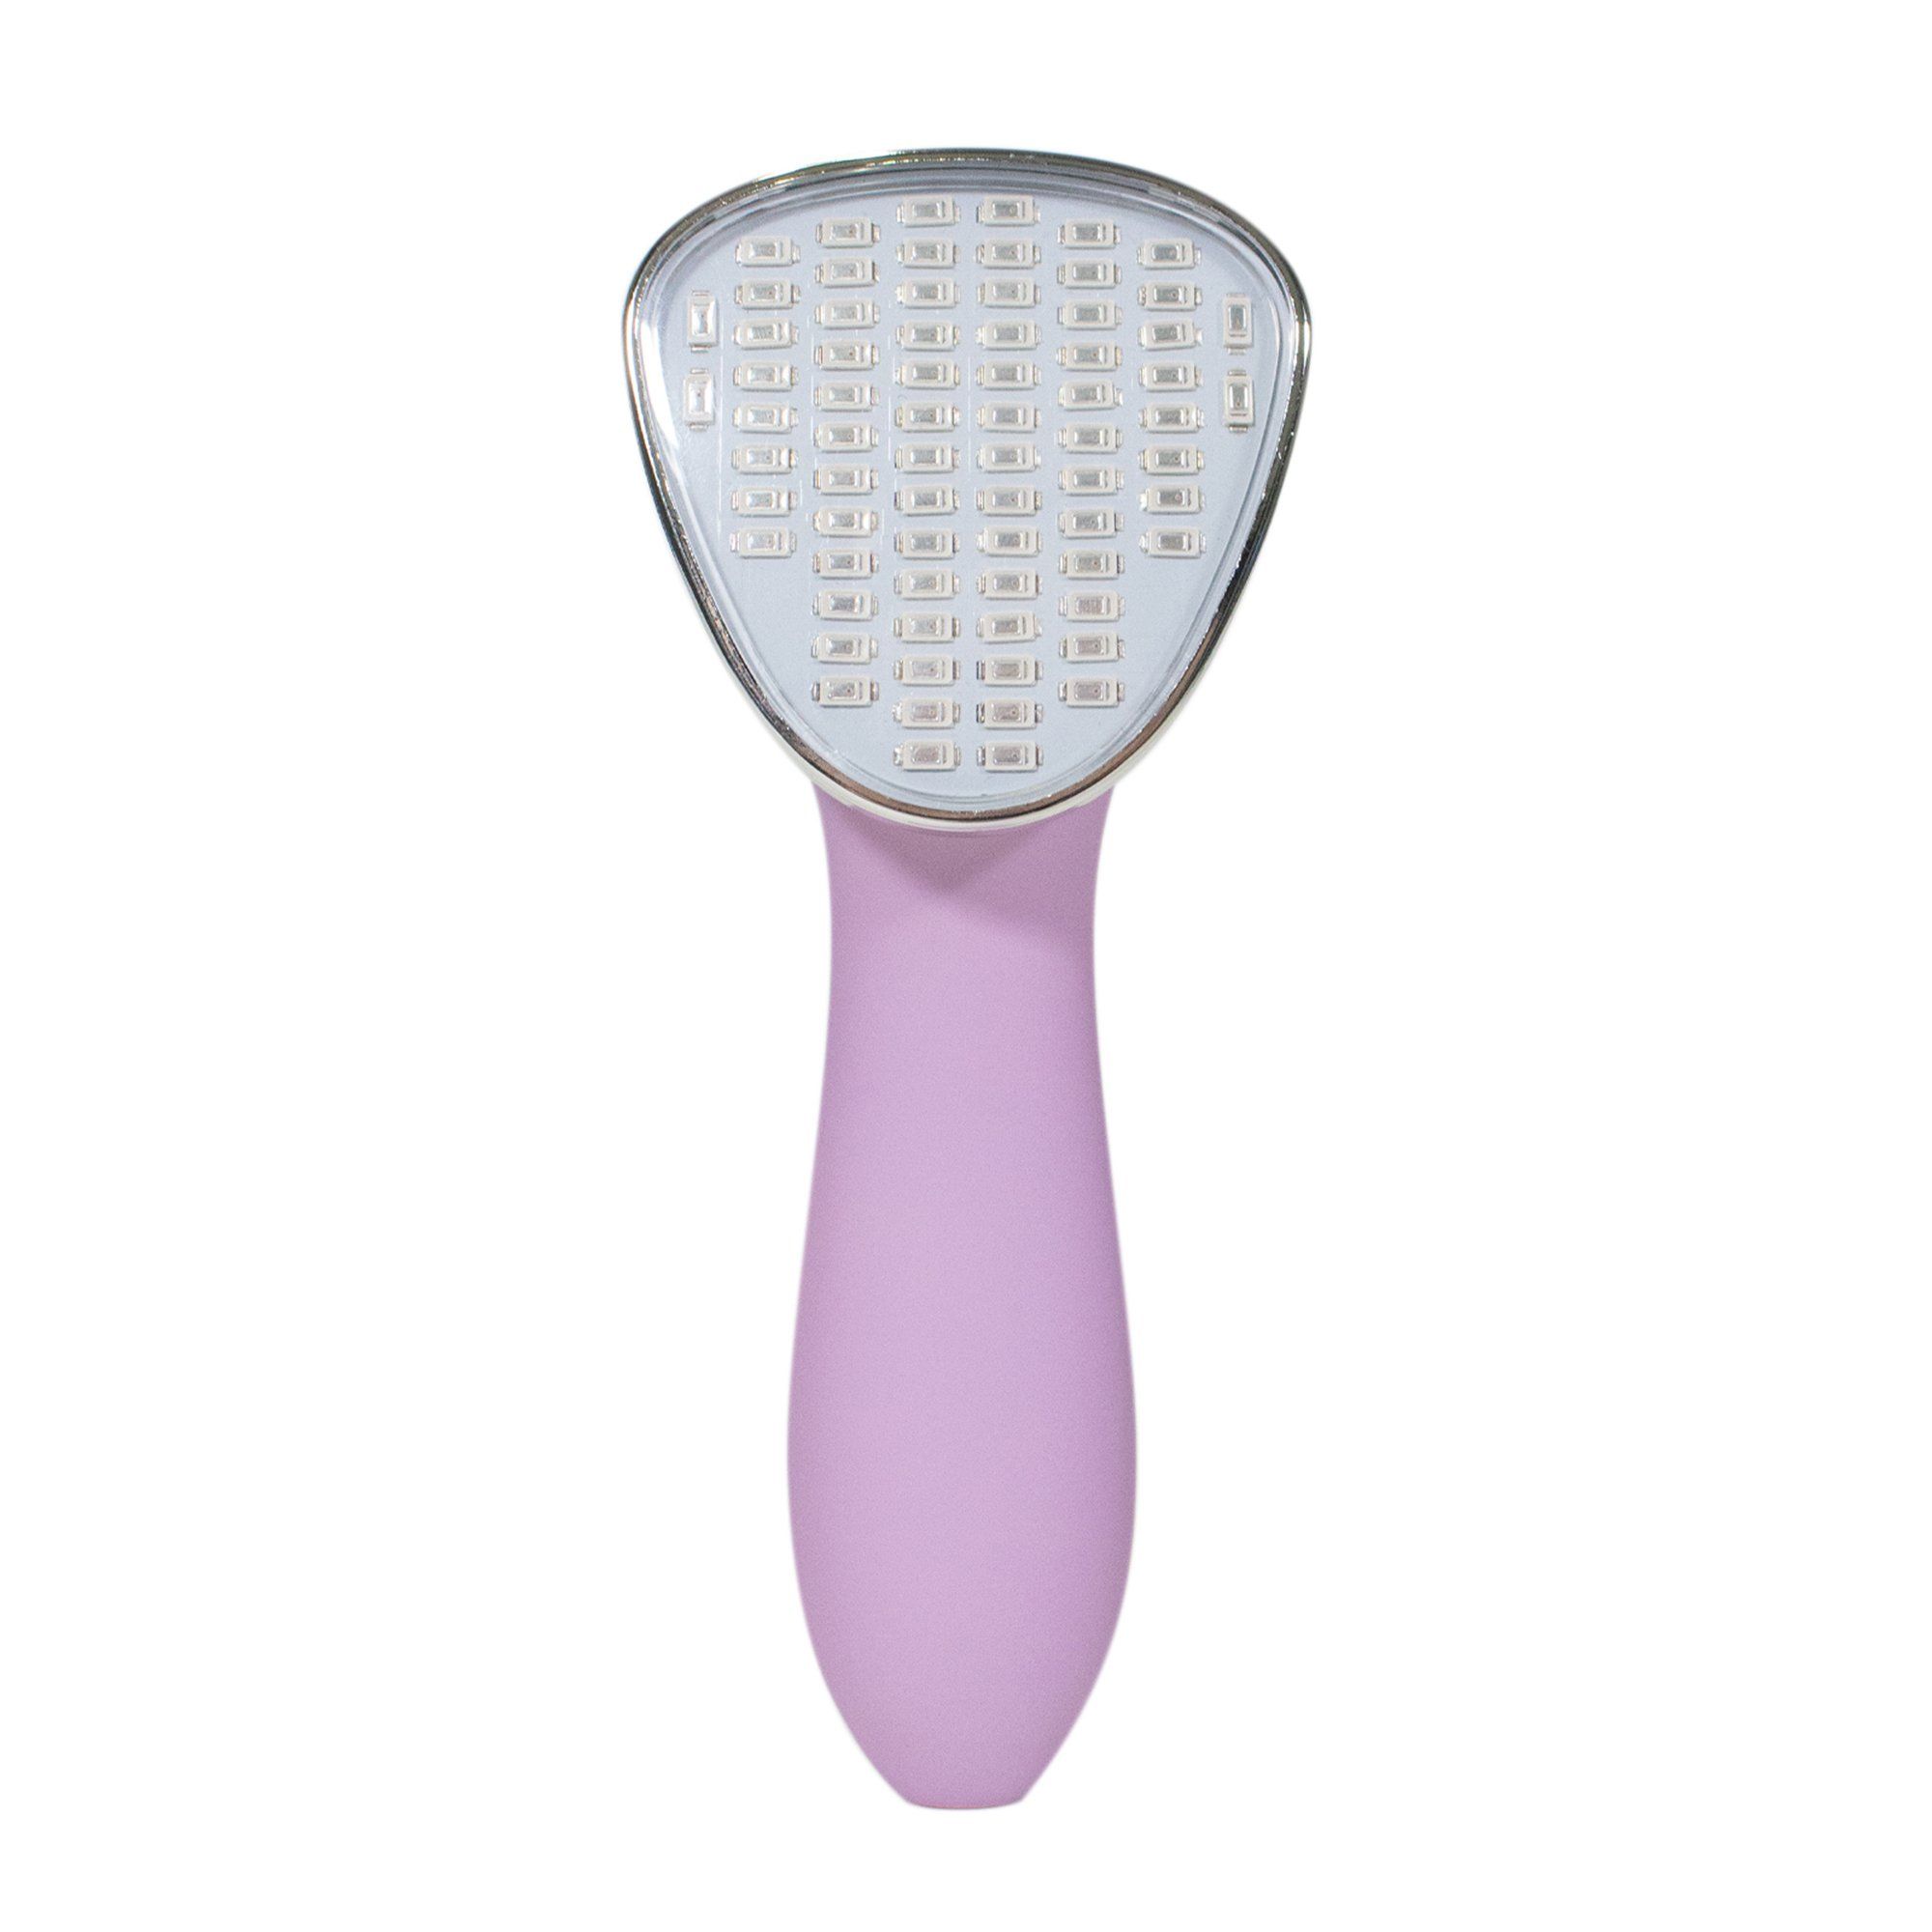 reVive Clinical XL – LED Light Therapy for Wrinkle Reduction & Anti-Aging Device